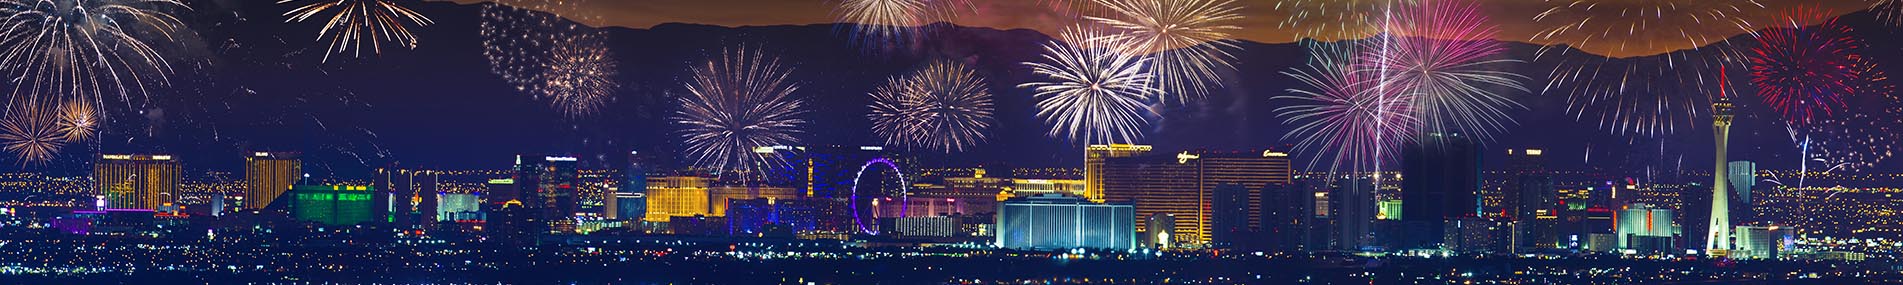 New Year’s Eve in Las Vegas